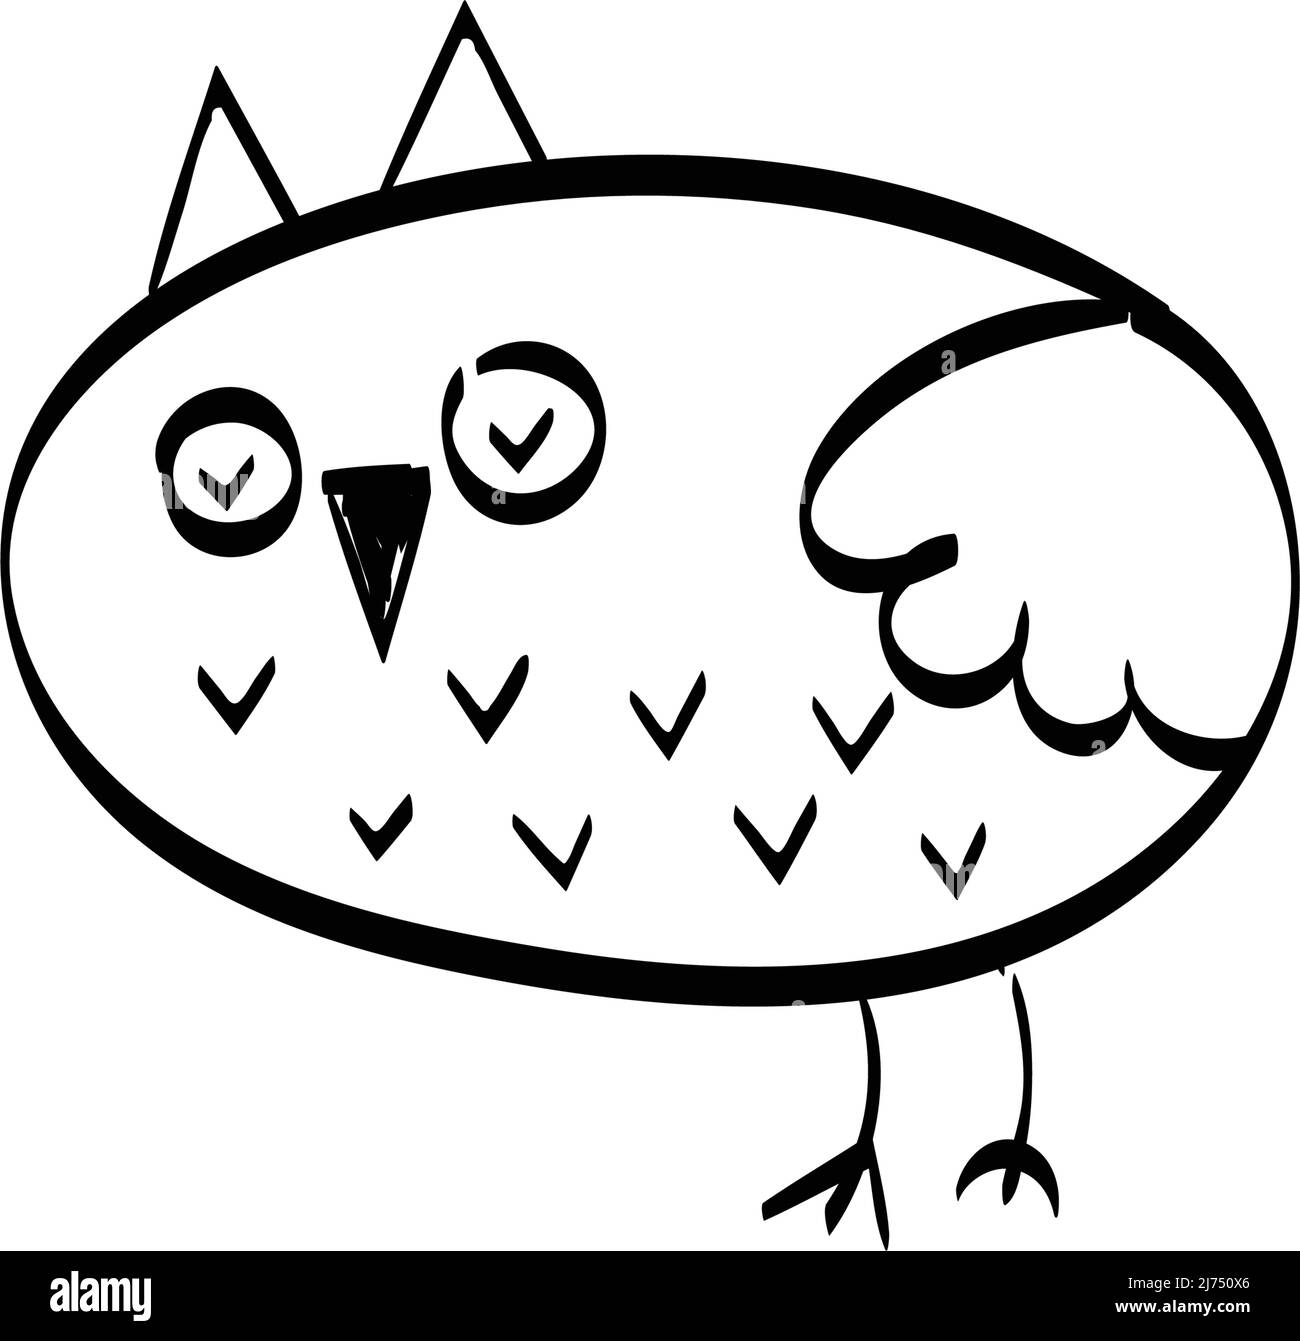 https://c8.alamy.com/comp/2J750X6/cute-owl-line-art-for-greeting-card-and-invitation-or-use-as-t-shirt-design-or-tattoo-design-2J750X6.jpg